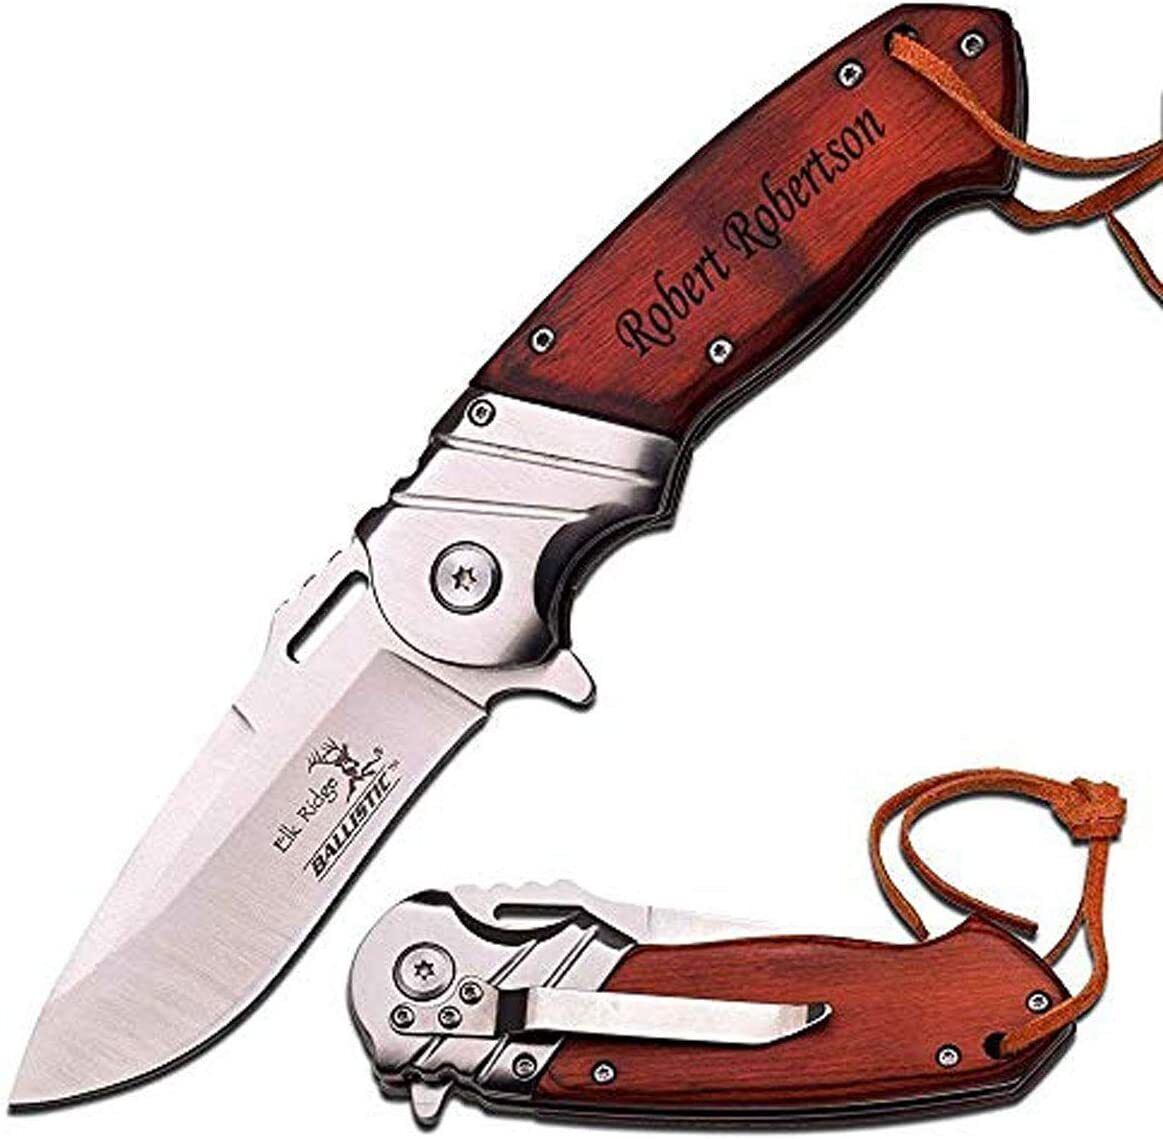 Personalized Laser Engraved FOLDING KNIFE, Brown wood Handle with Pocket Clip